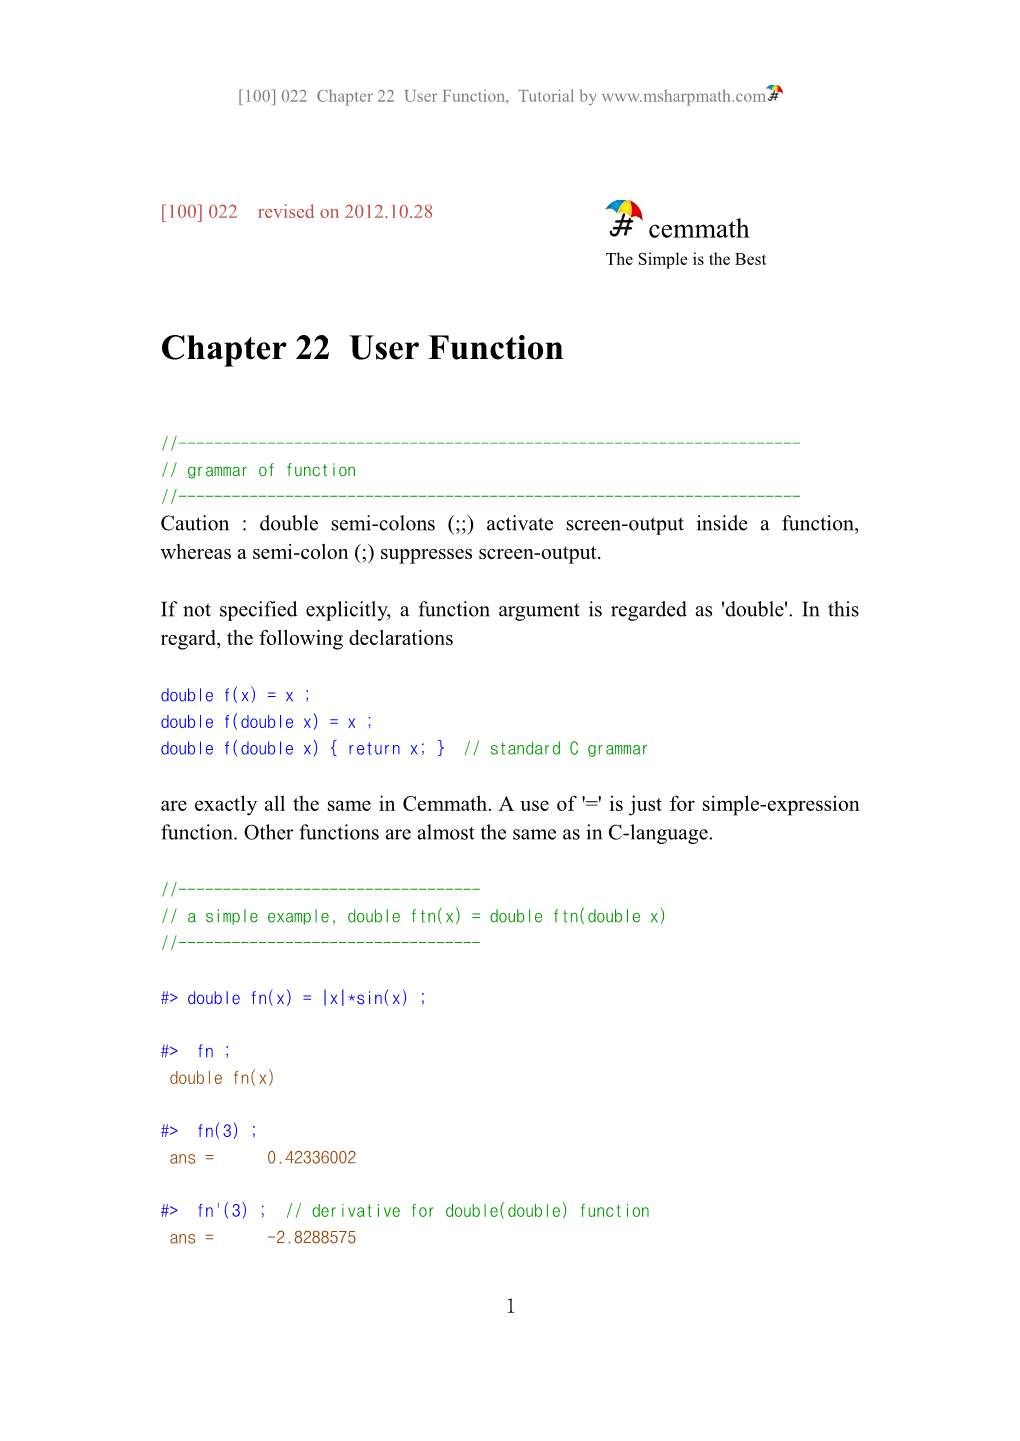 Chapter 22 User Function